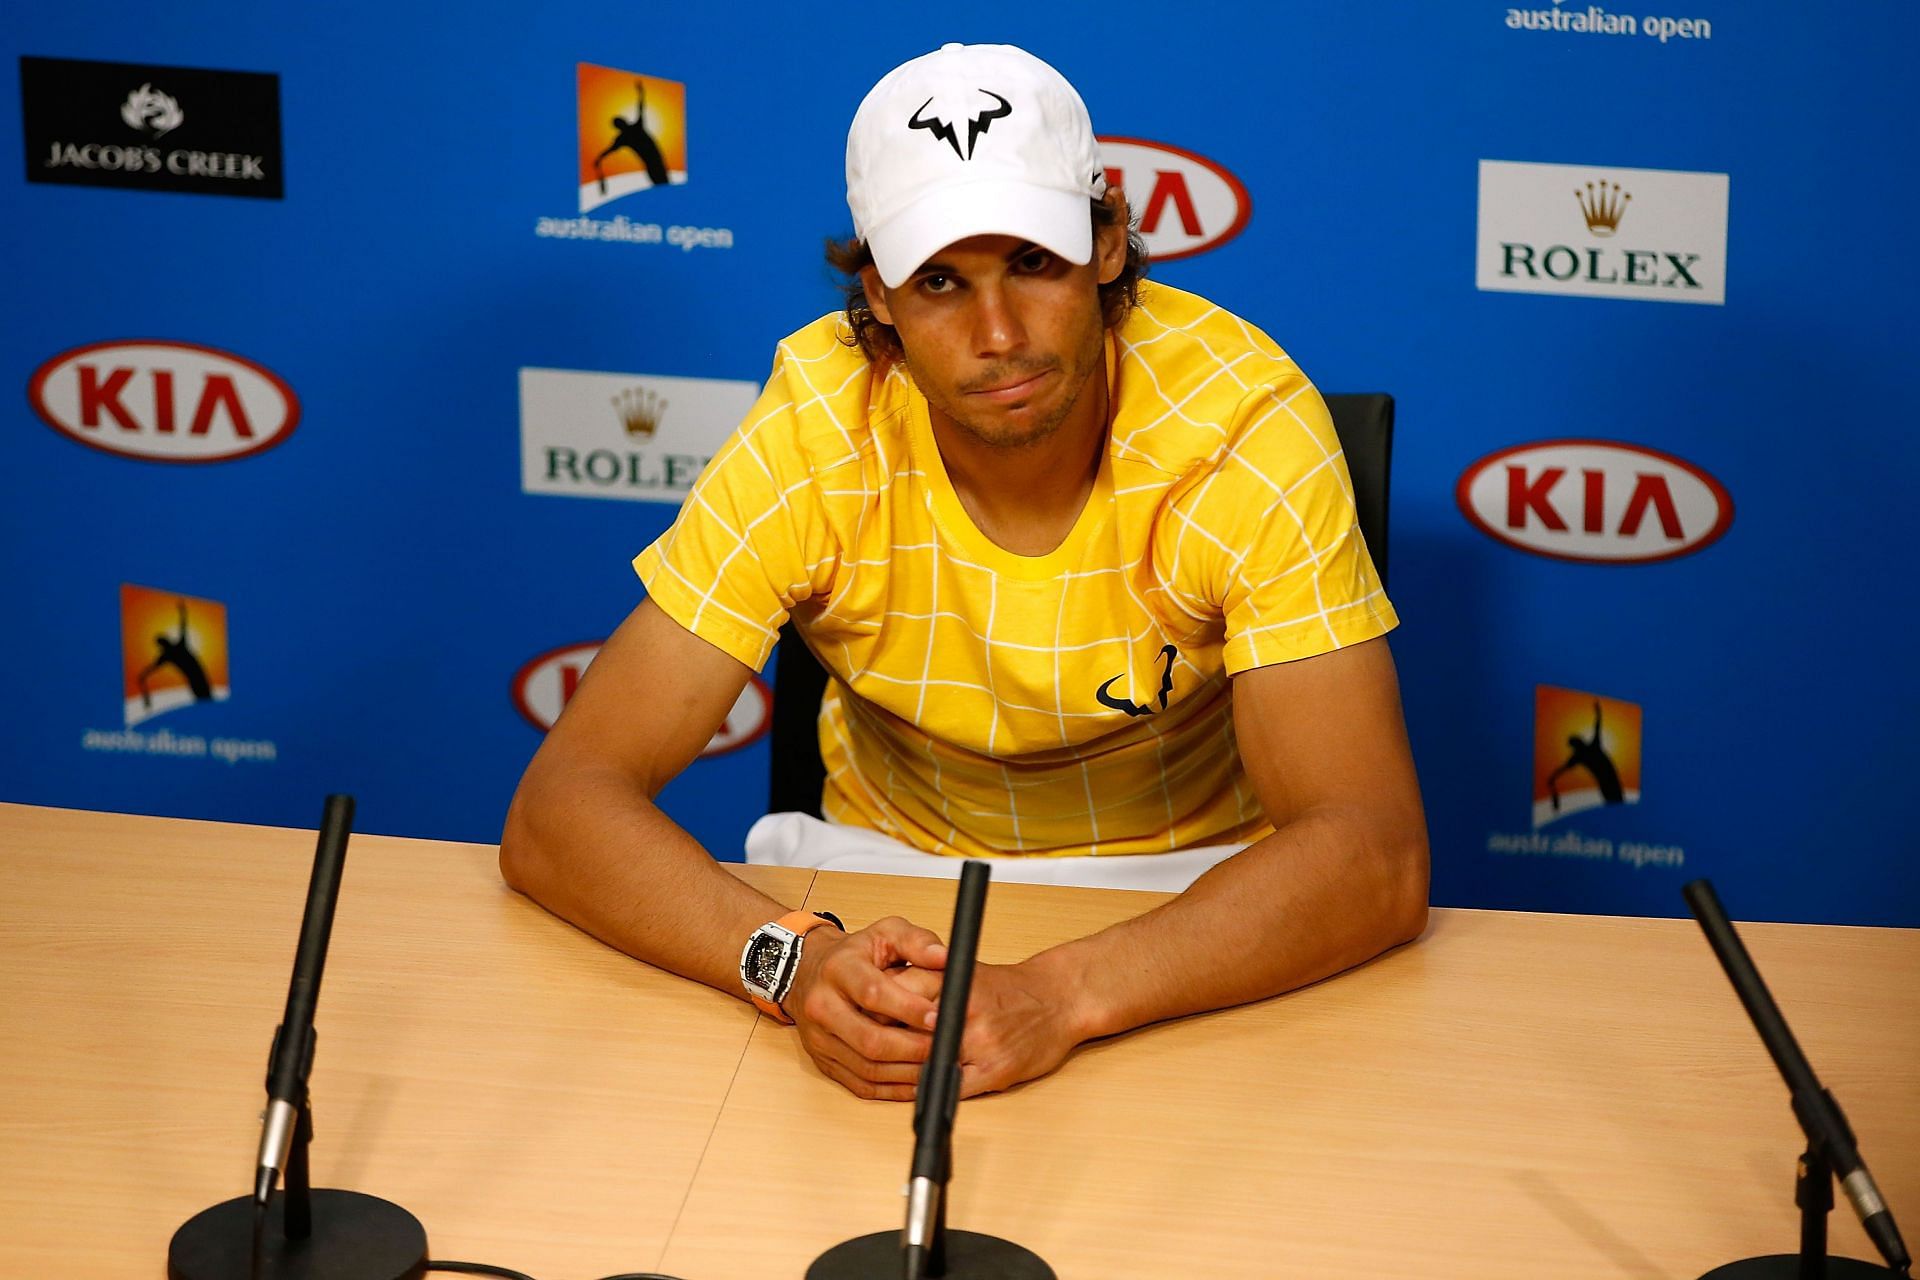 Rafael Nadal at a press conference at the 2016 Australian Open - Day 2